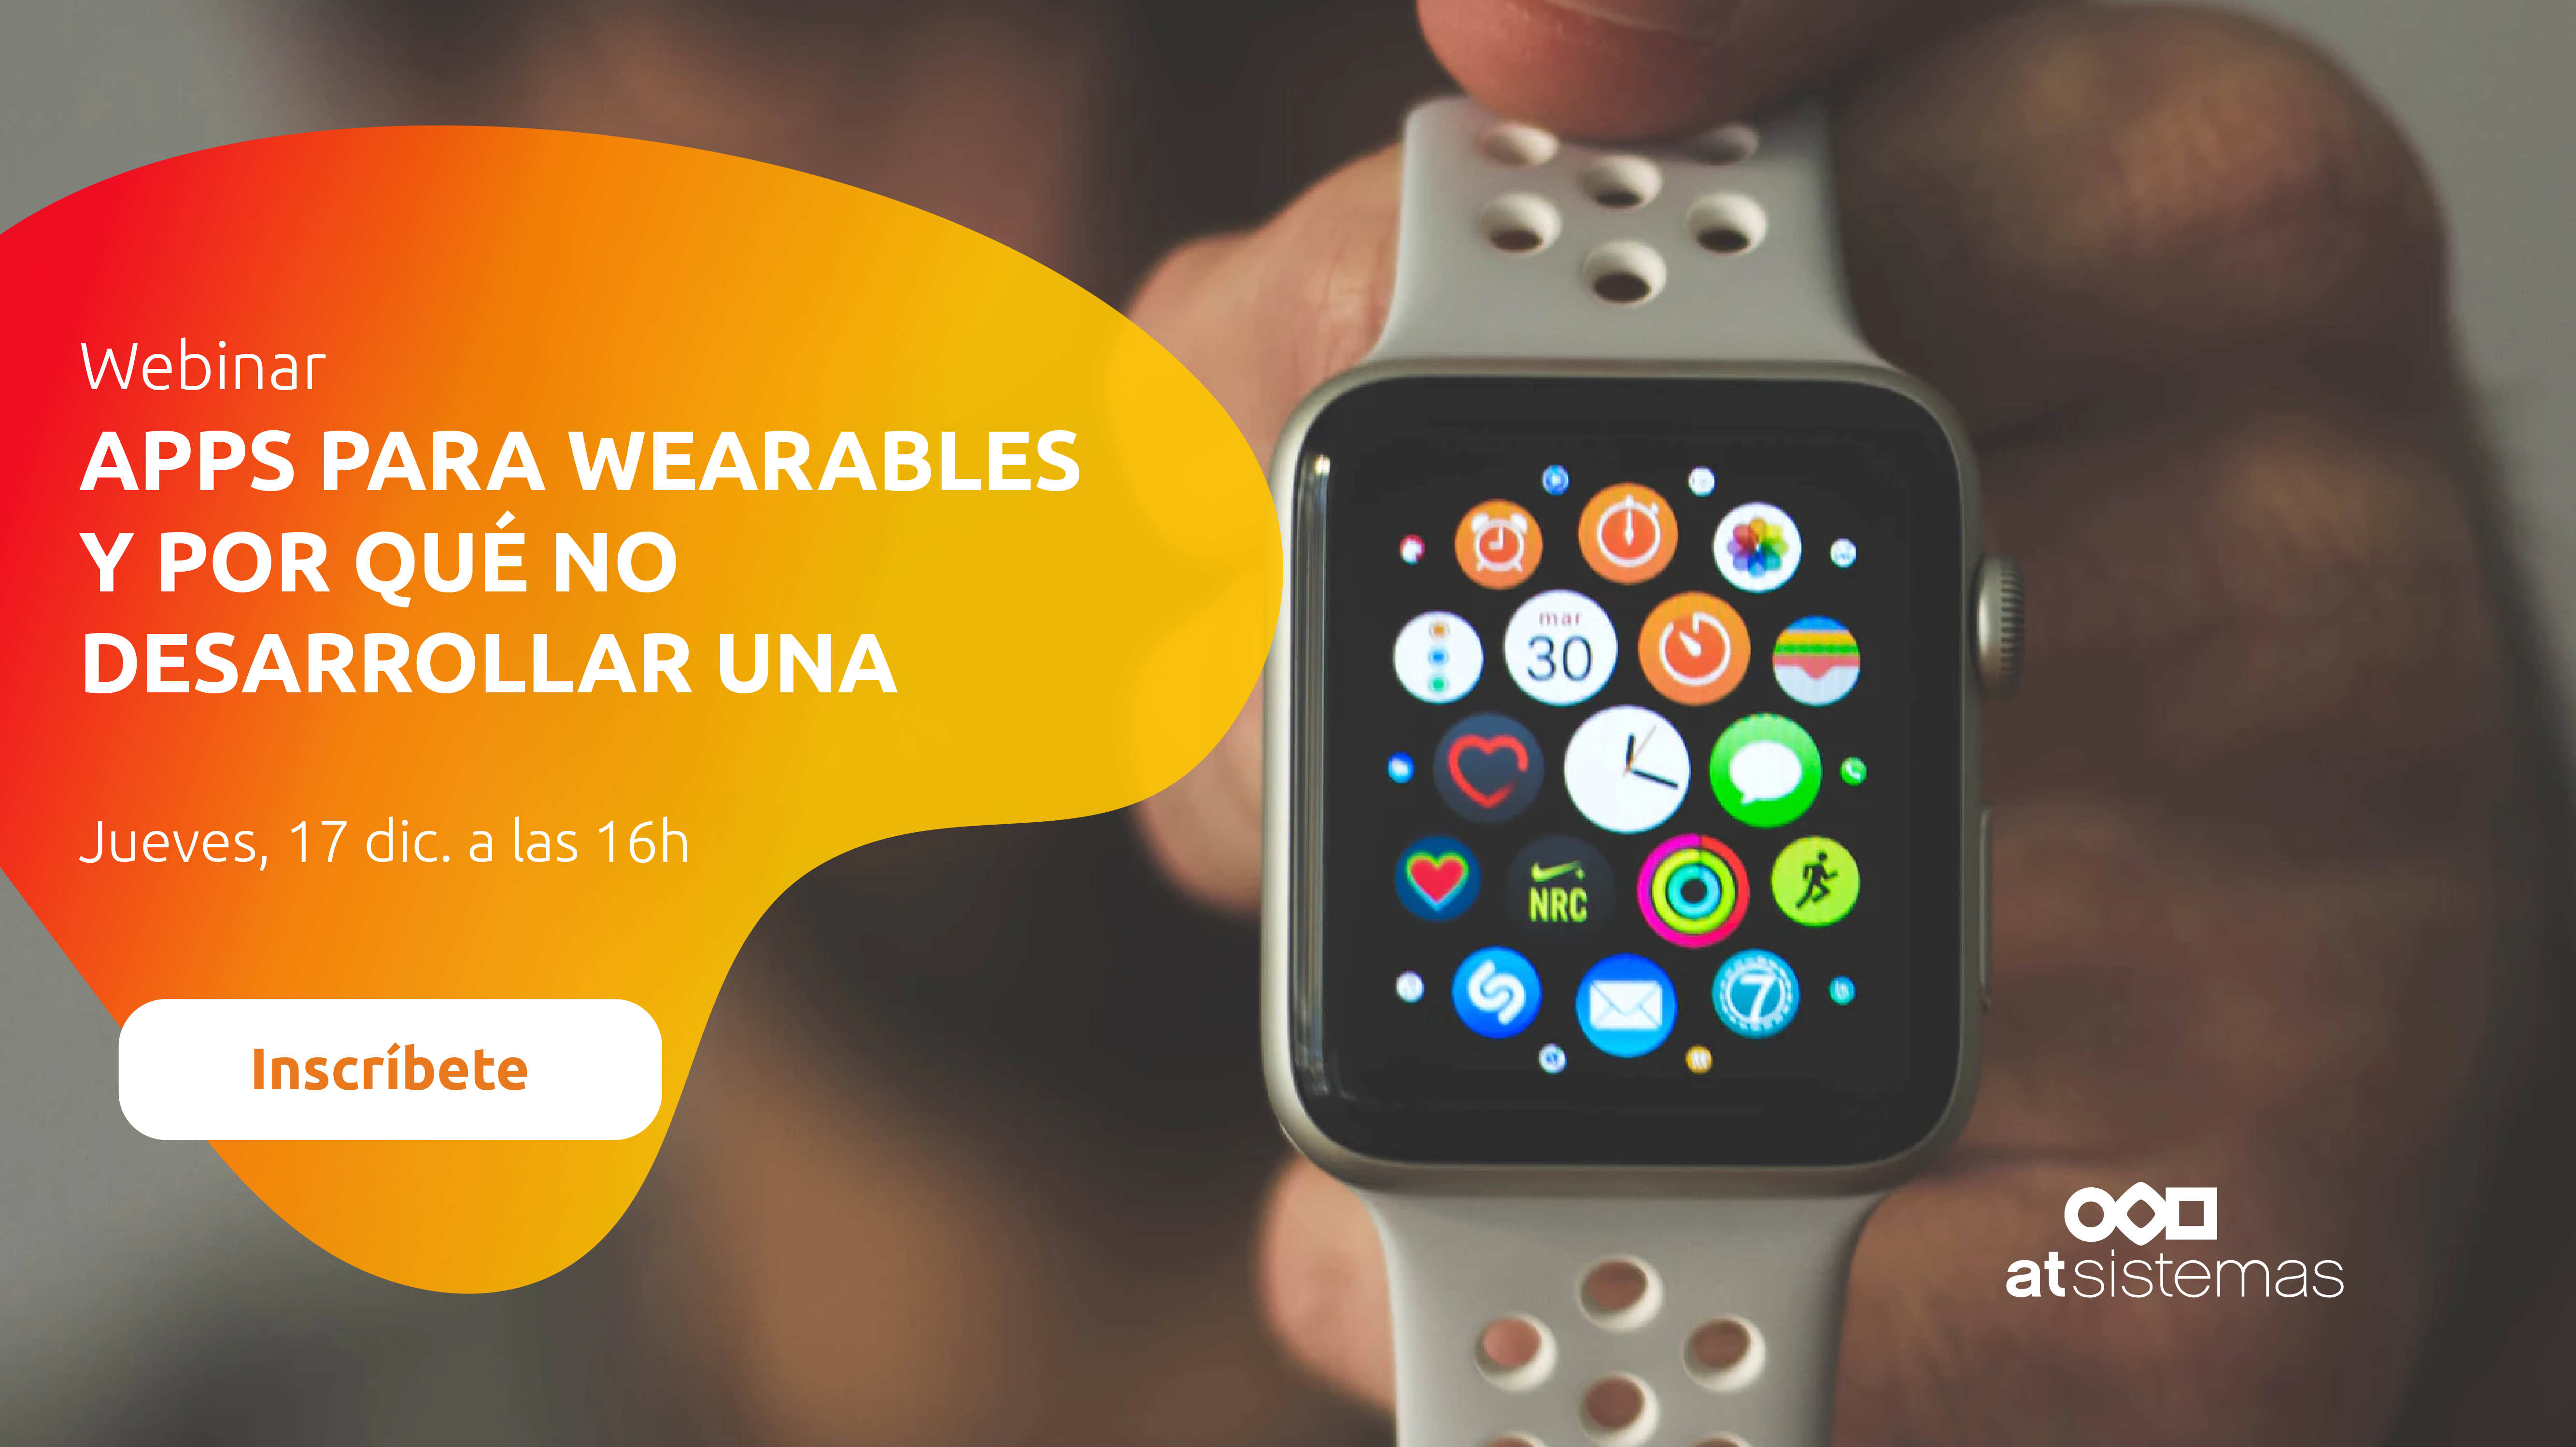 Apps para wearables